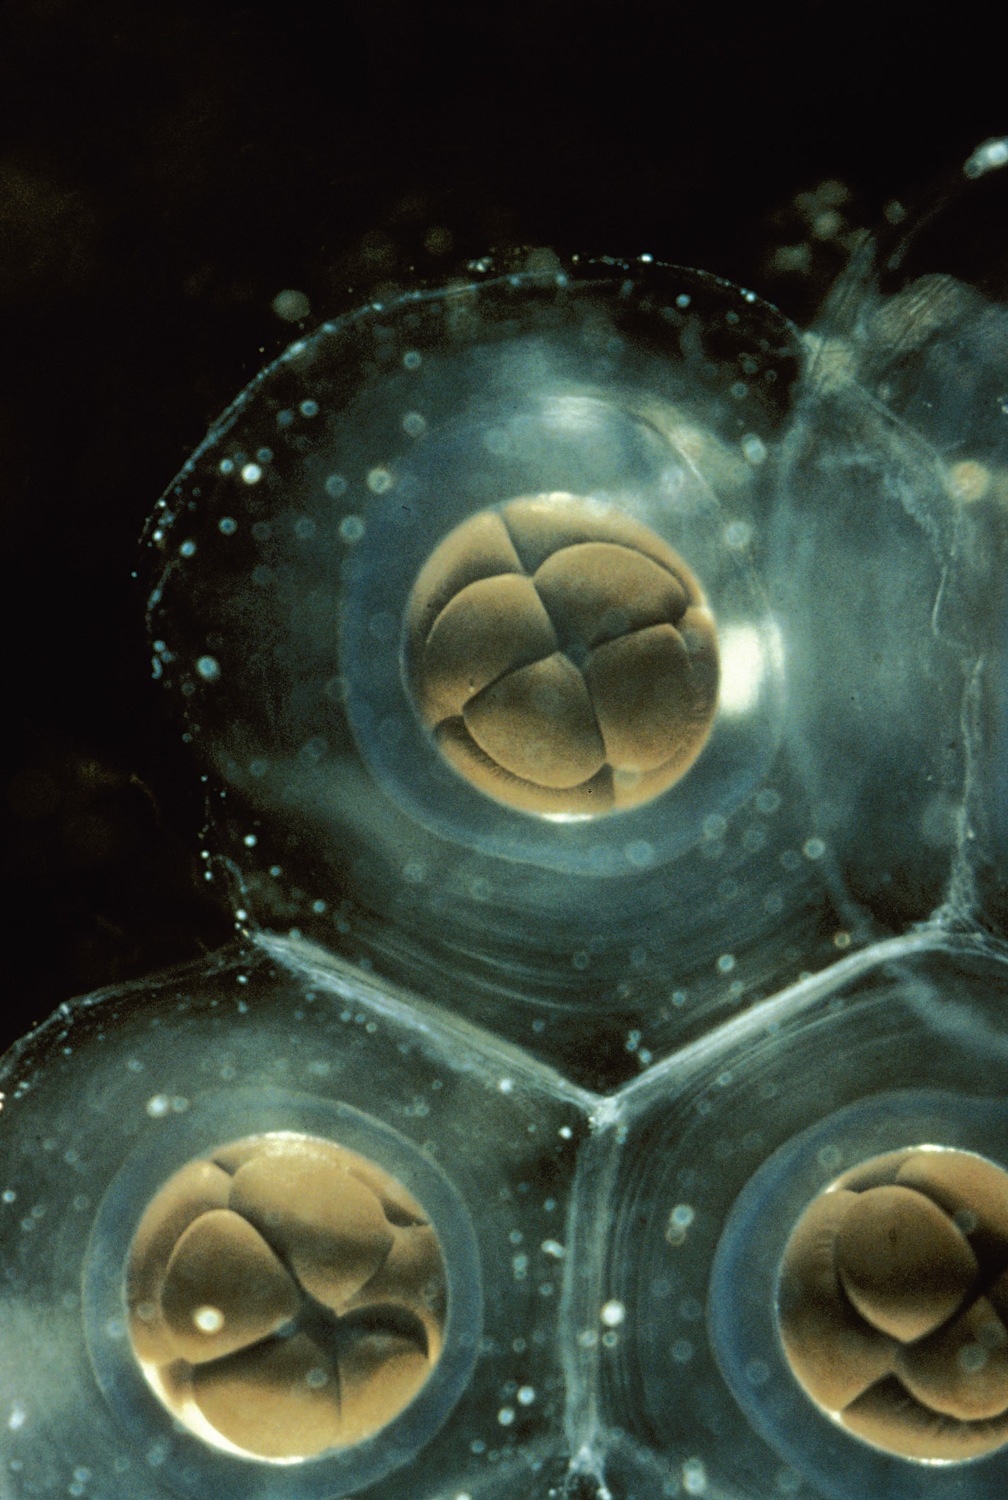 Cell Division in Frog Embryos